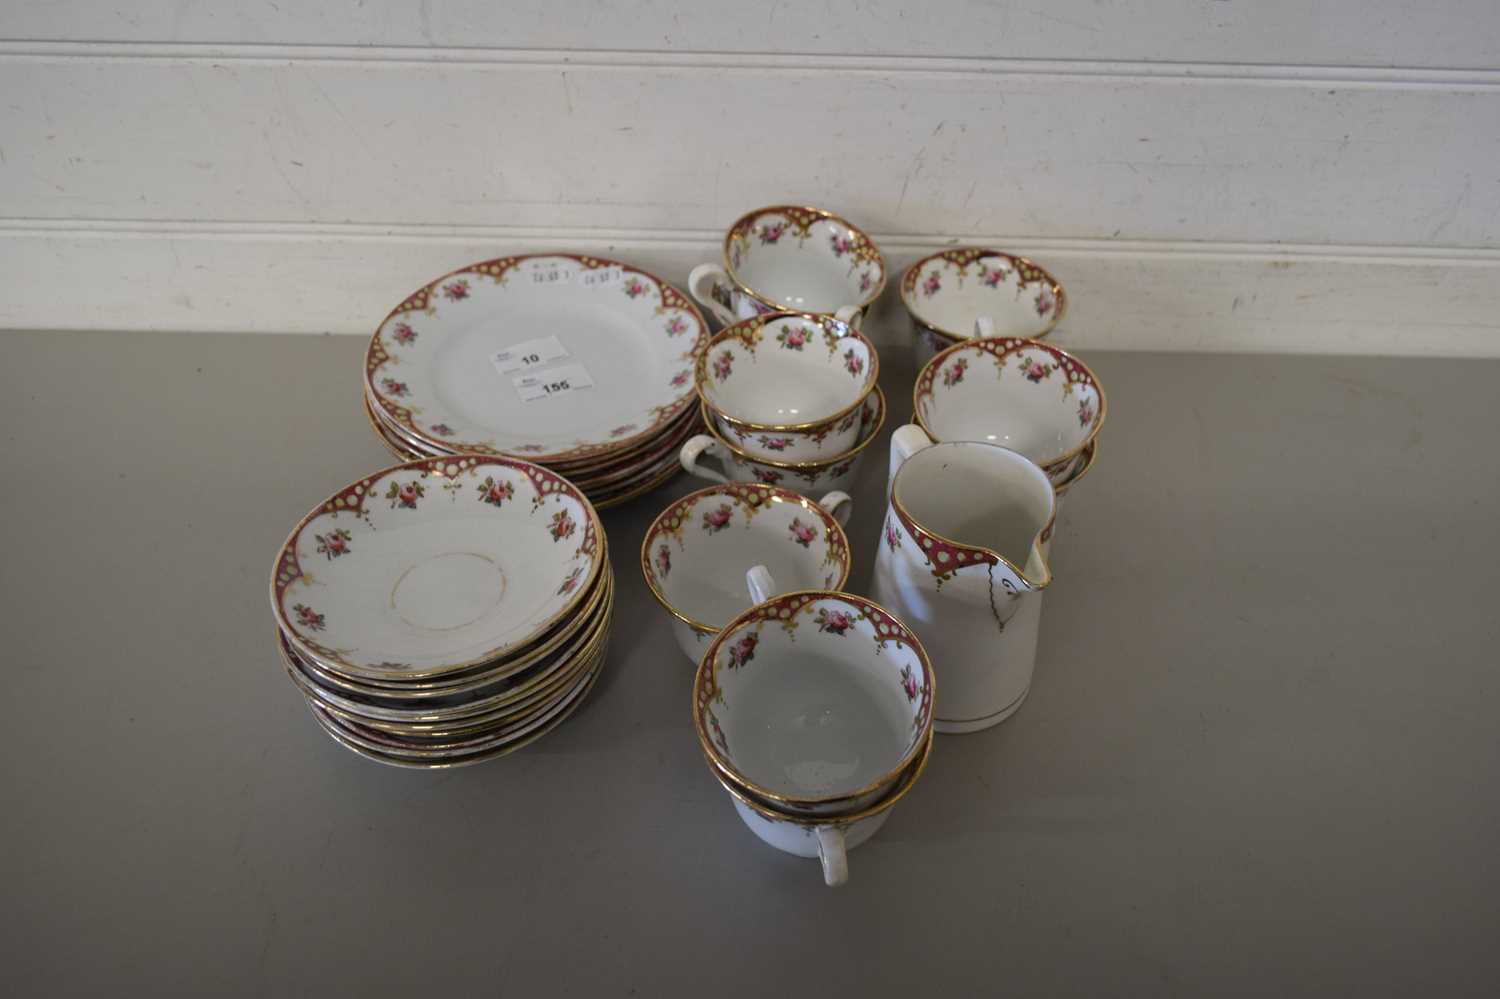 QUANTITY OF ROYAL STAFFORD FLORAL DECORATED CHINA WARES